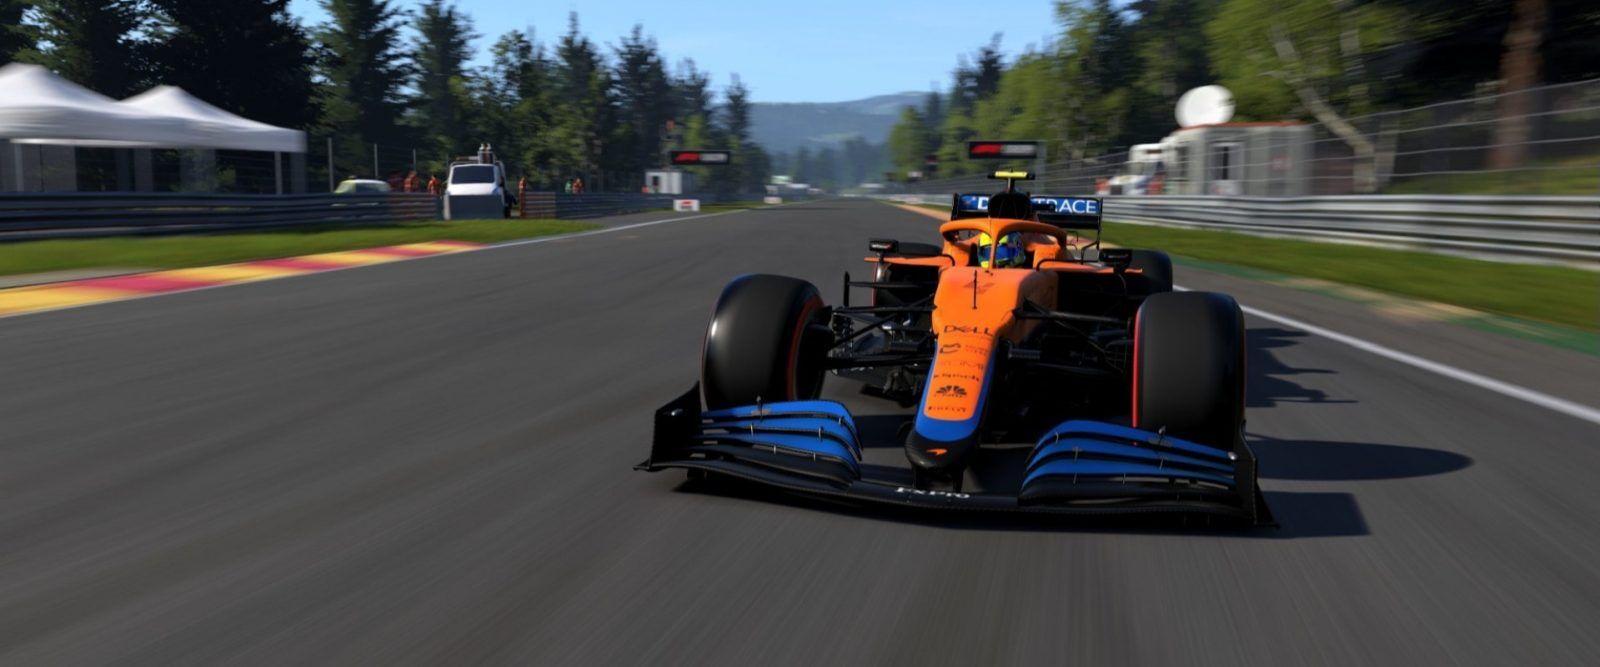 F1 2021 Guide: How to Manage Your Tyres